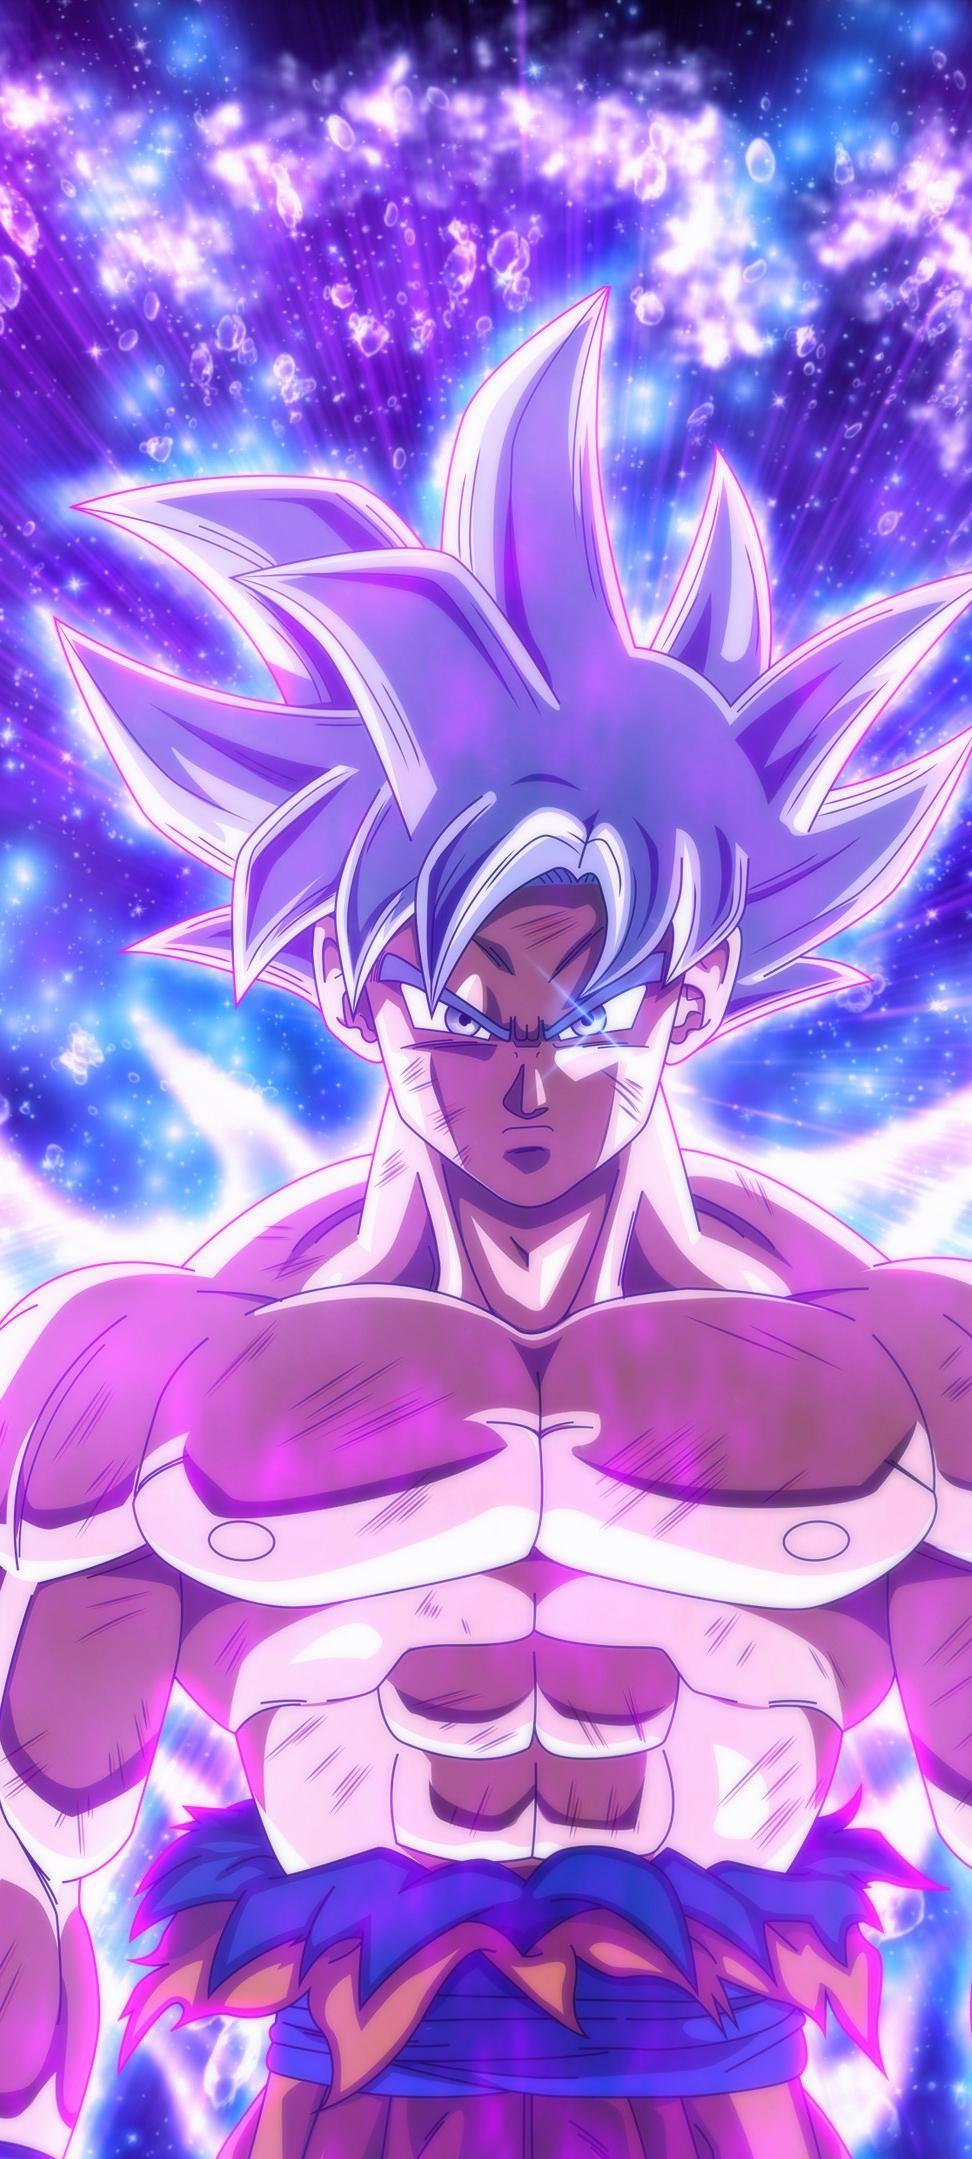 Goku iPhone Wallpaper Visit To High Quality